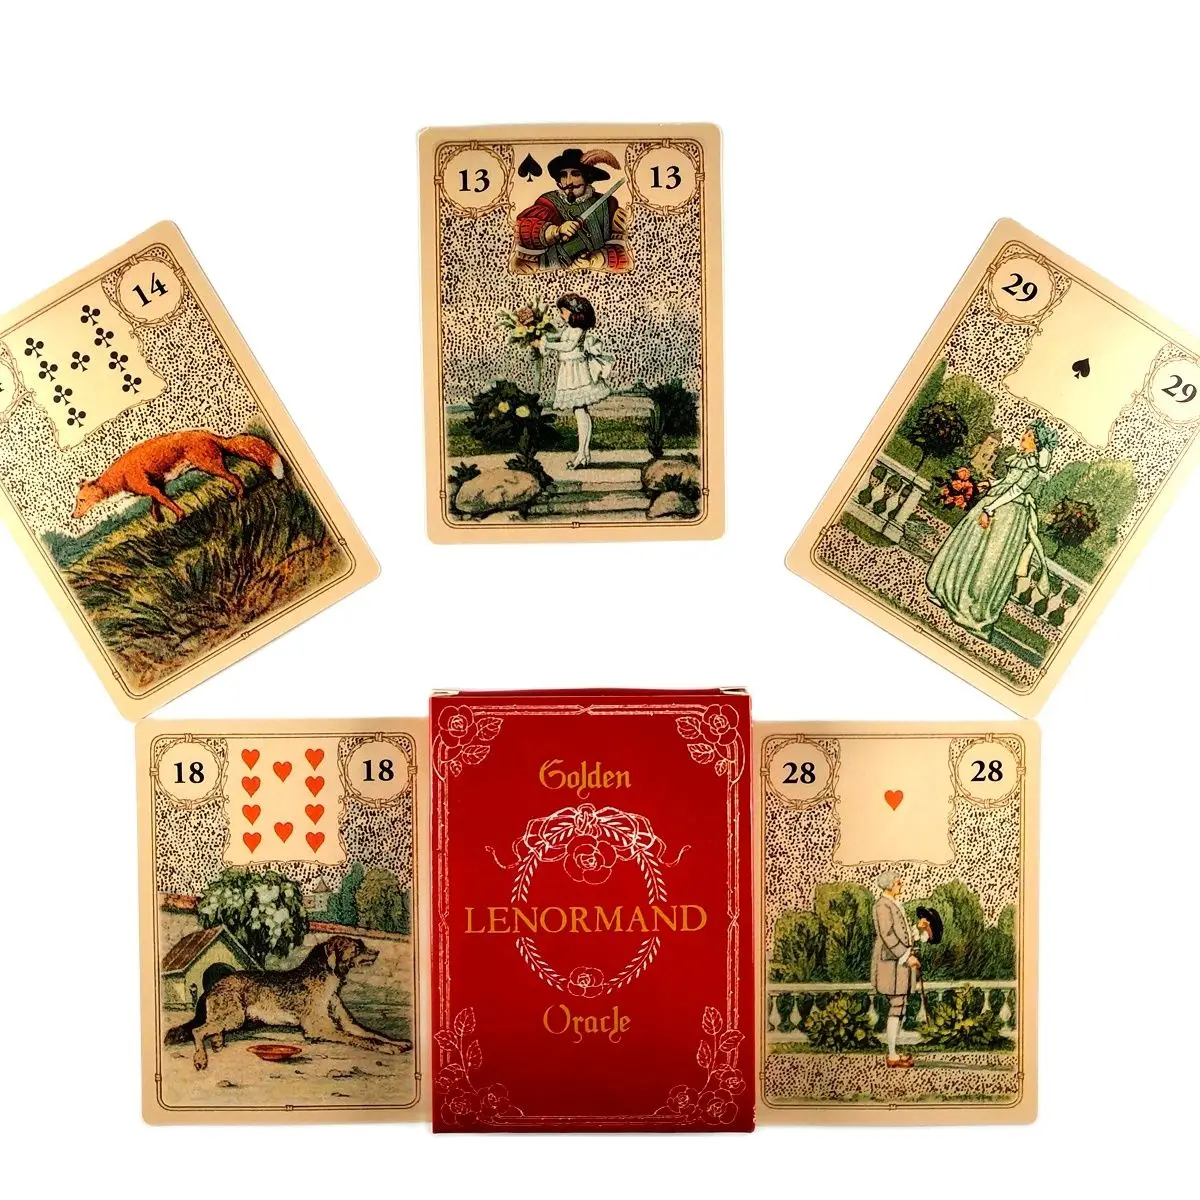 New Arrival High Quality Golden Lenormand Oracle Tarot Cards Fortune Guidance Telling Divination Tarot Deck Board Game 36 Pcs